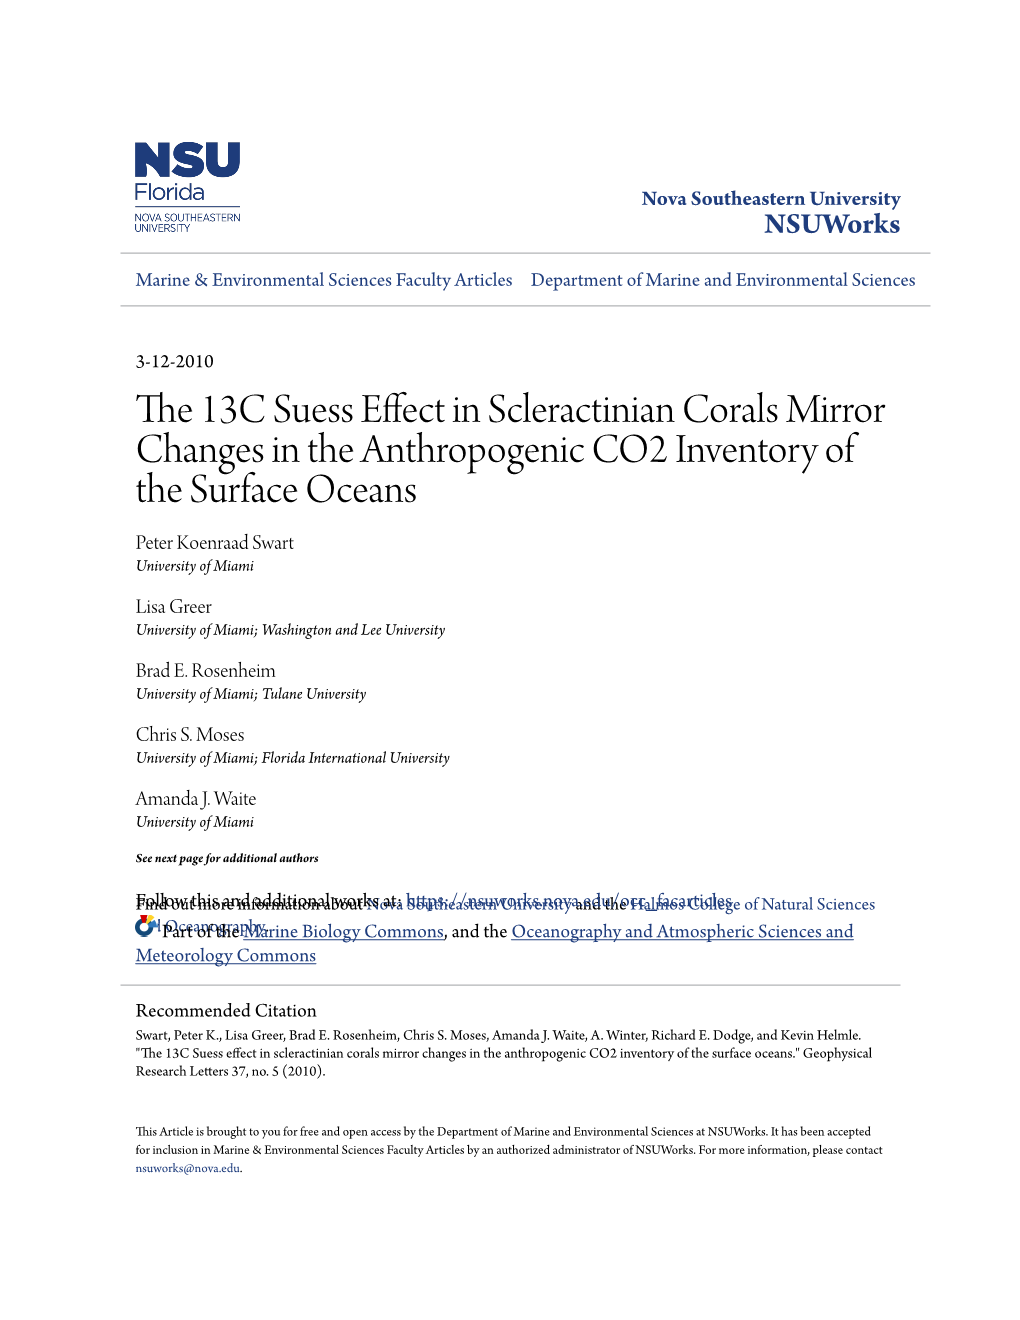 The 13C Suess Effect in Scleractinian Corals Mirror Changes in the Anthropogenic CO2 Inventory of the Surface Oceans Peter K